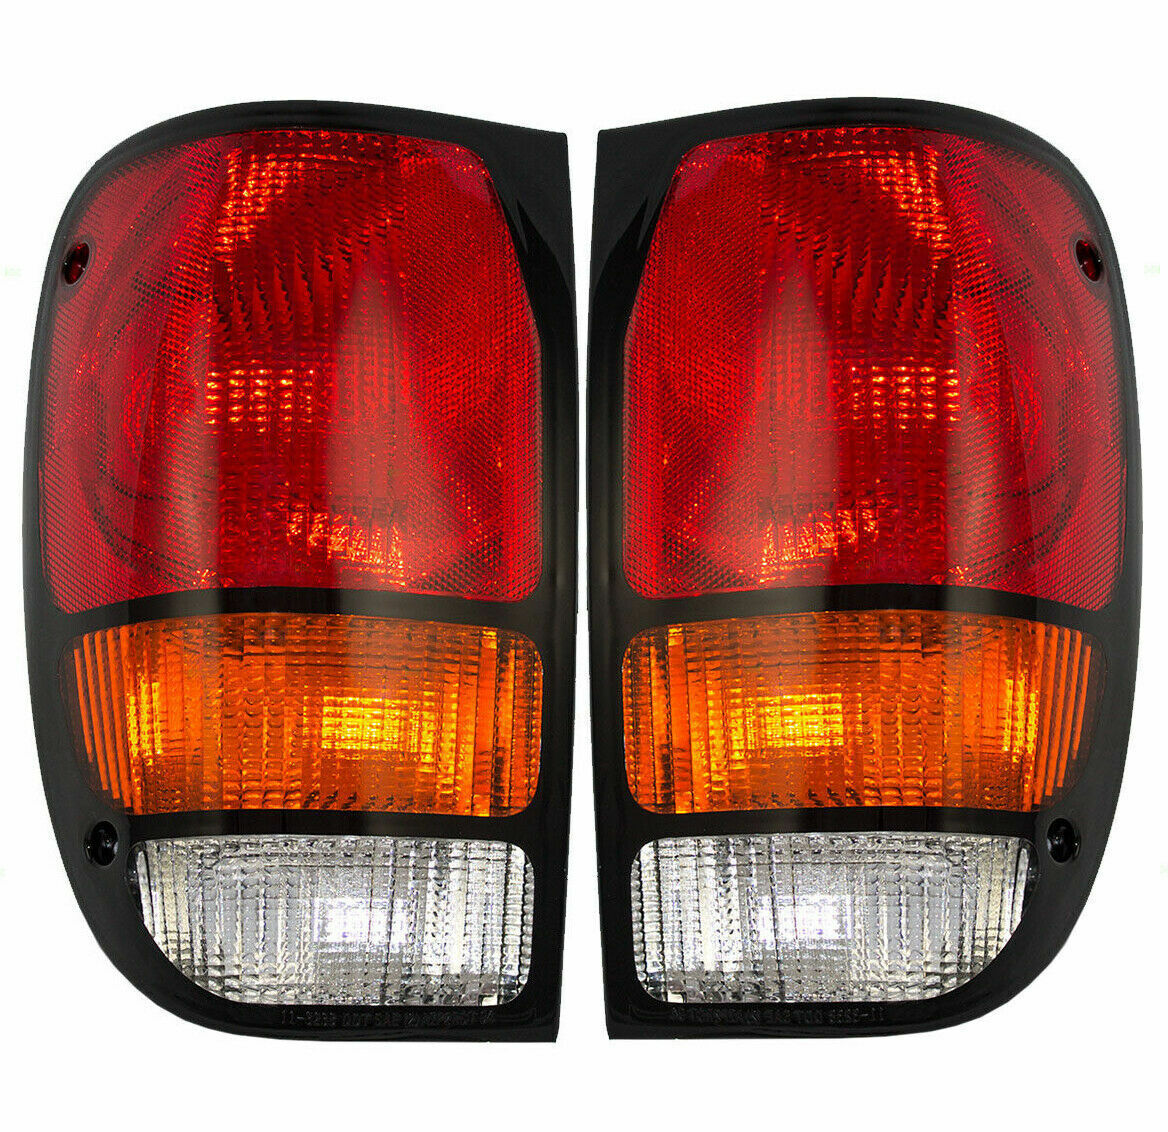 FIT FOR MAZDA B2300 2500 1994 - 2000 REAR TAIL LAMP RIGHT & LEFT PAIR SET